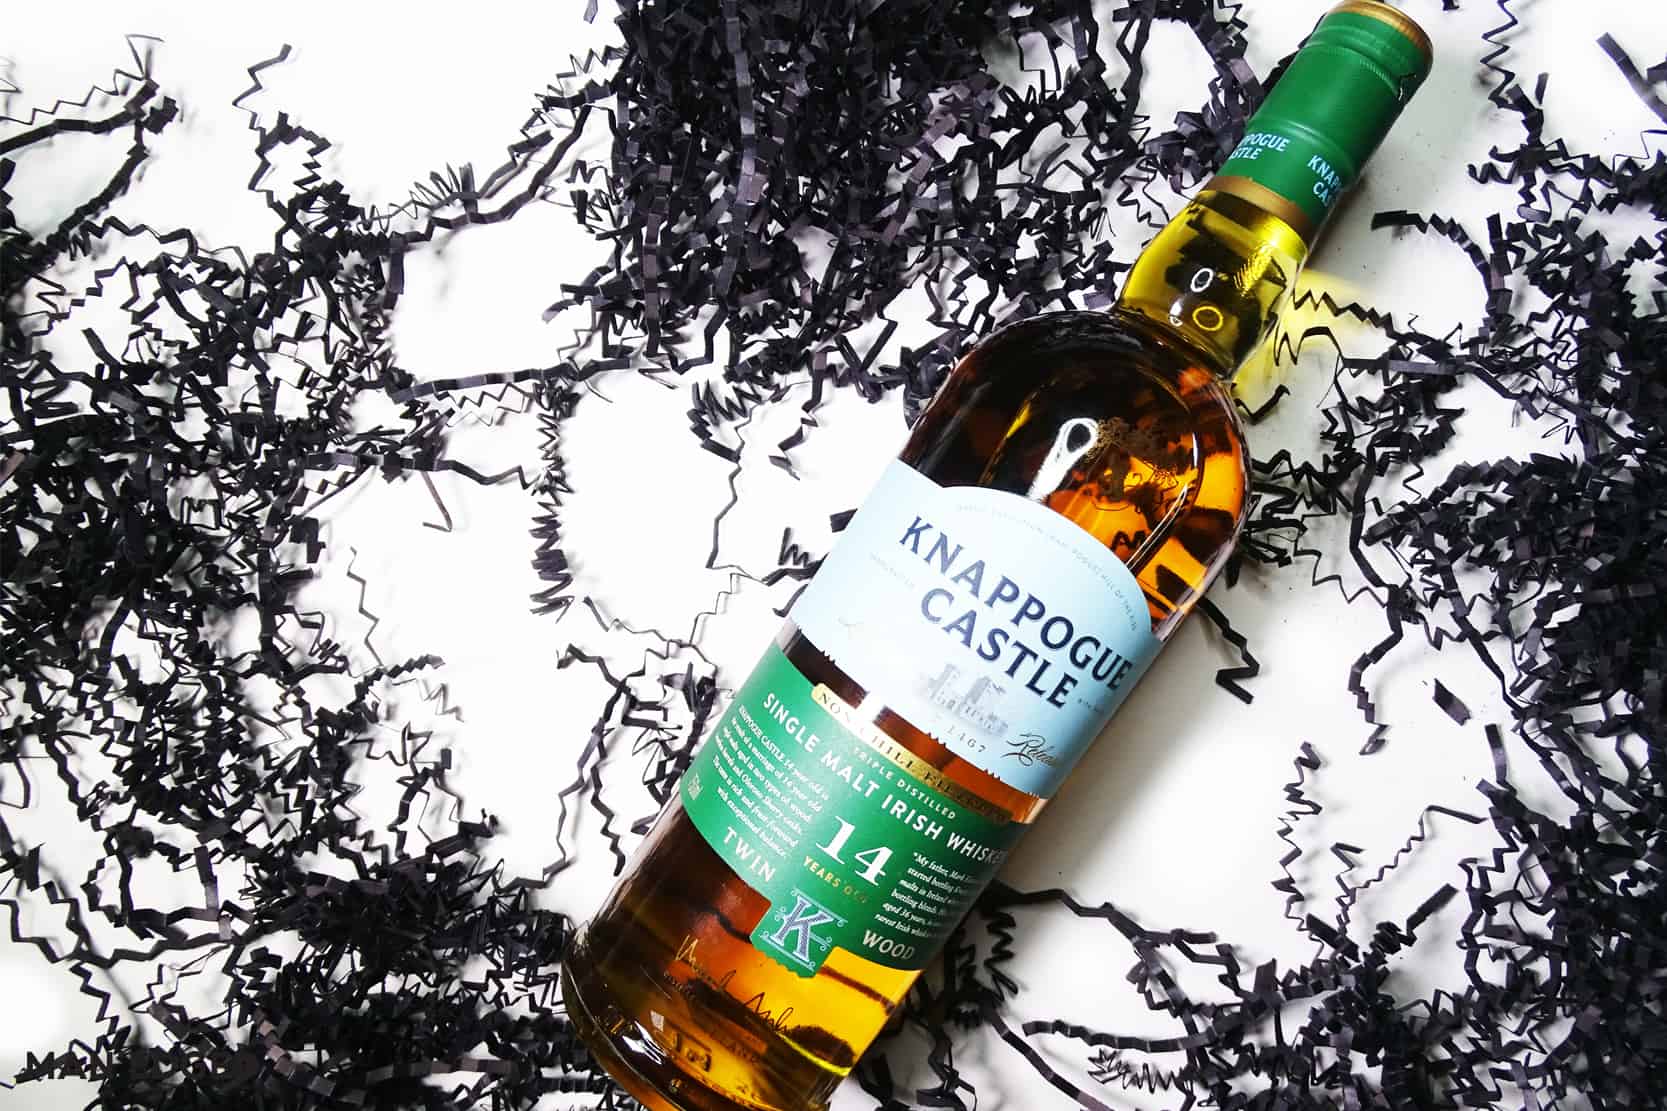 Knappogue castle single malt irish whiskey featured in MAN'edged Magazine's best whiskey to gift this holiday season